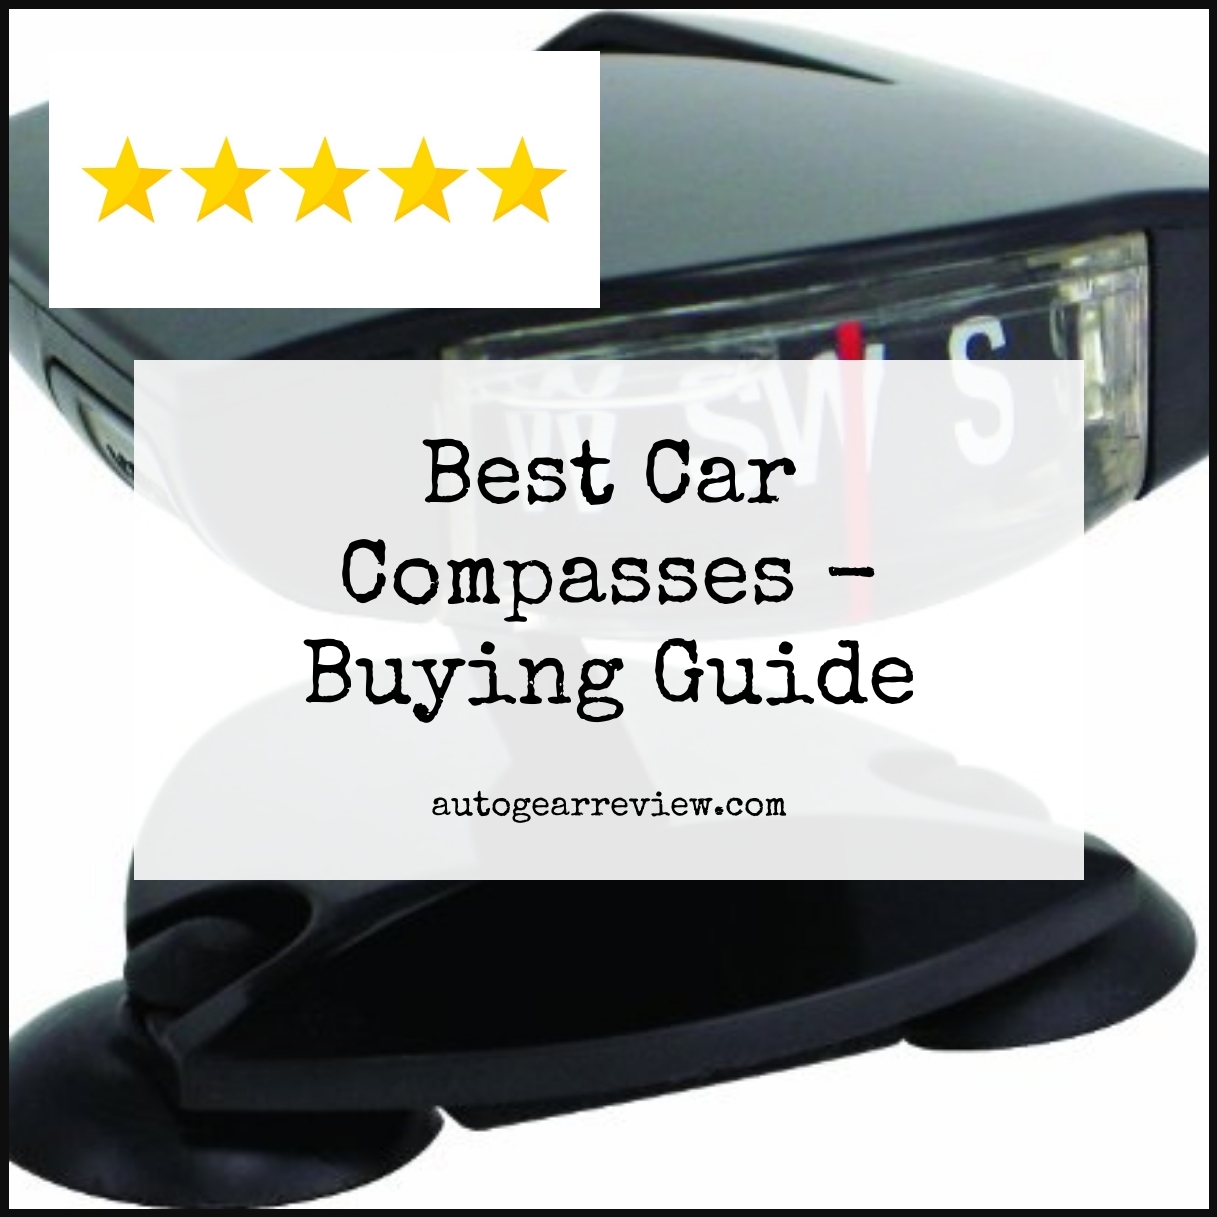 Best Car Compasses - Buying Guide